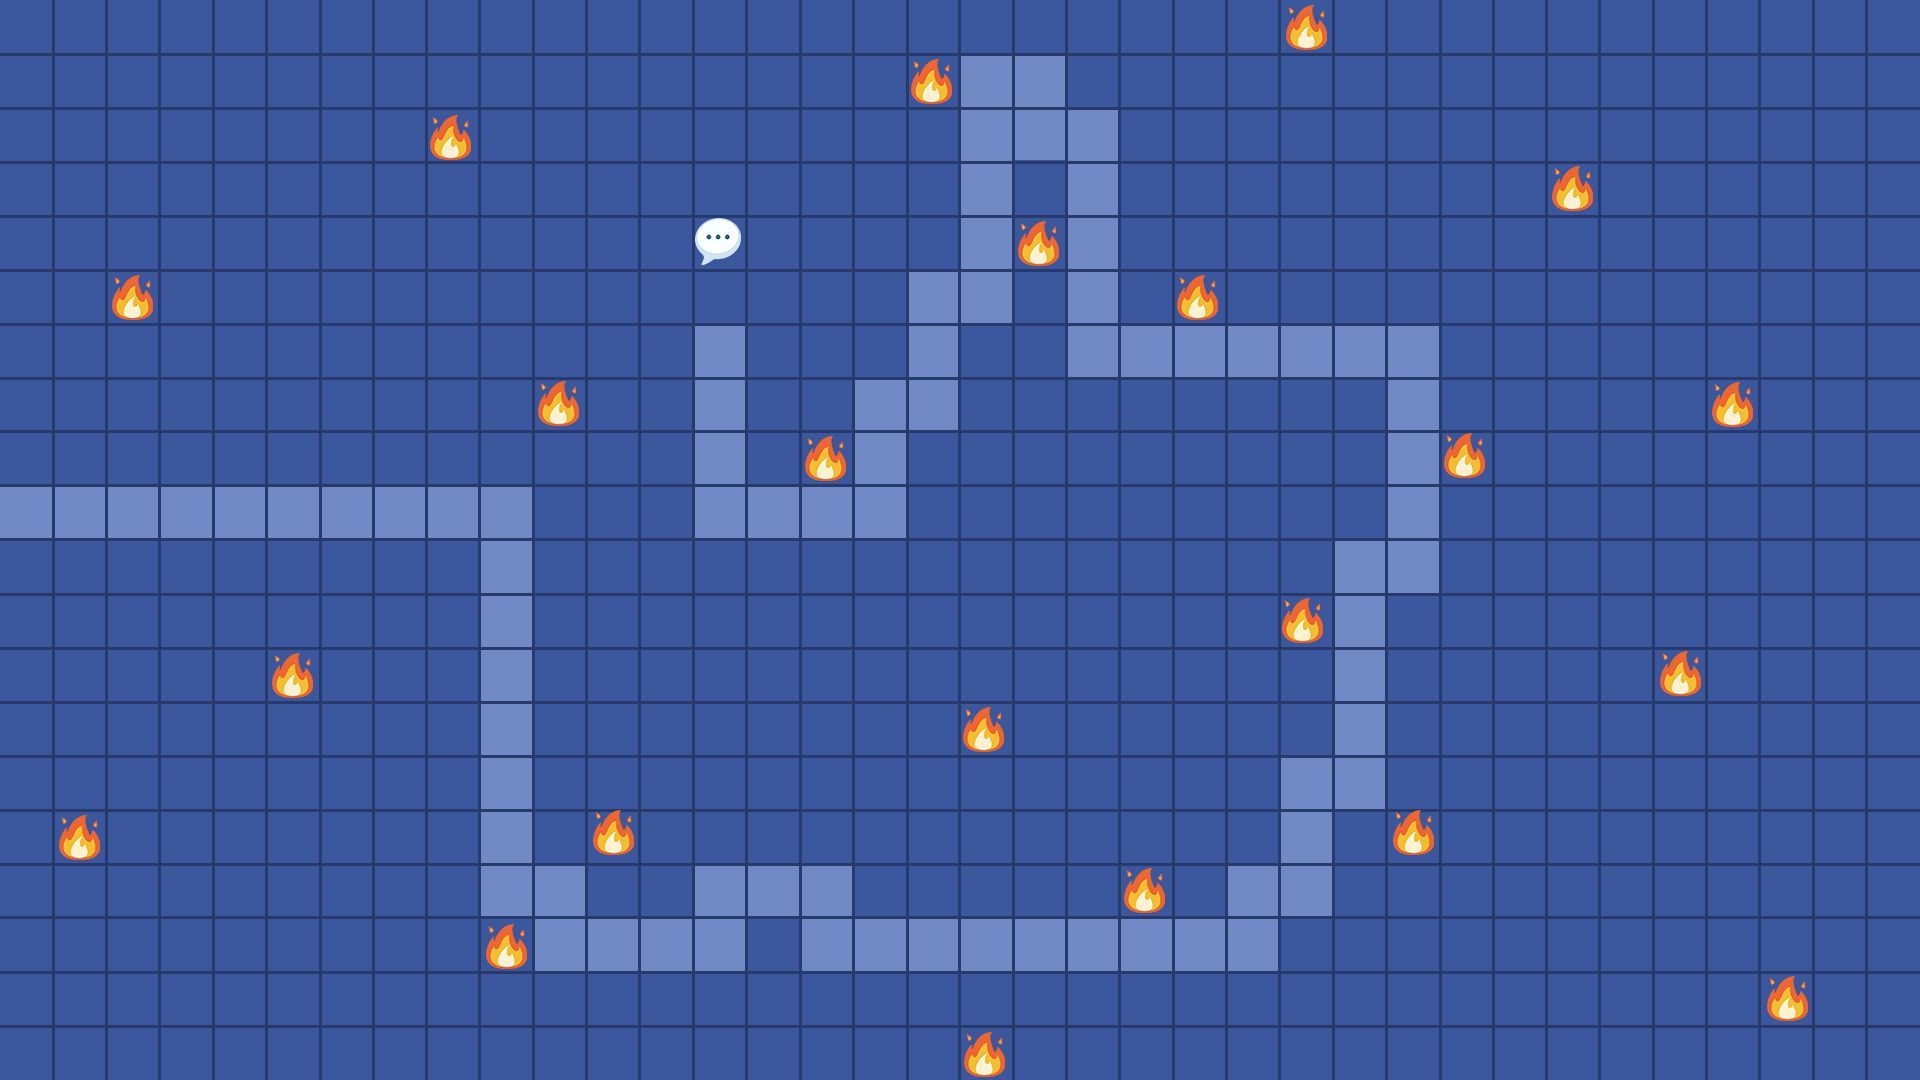 Facebook logo in a minefield, like the PC game minesweeper